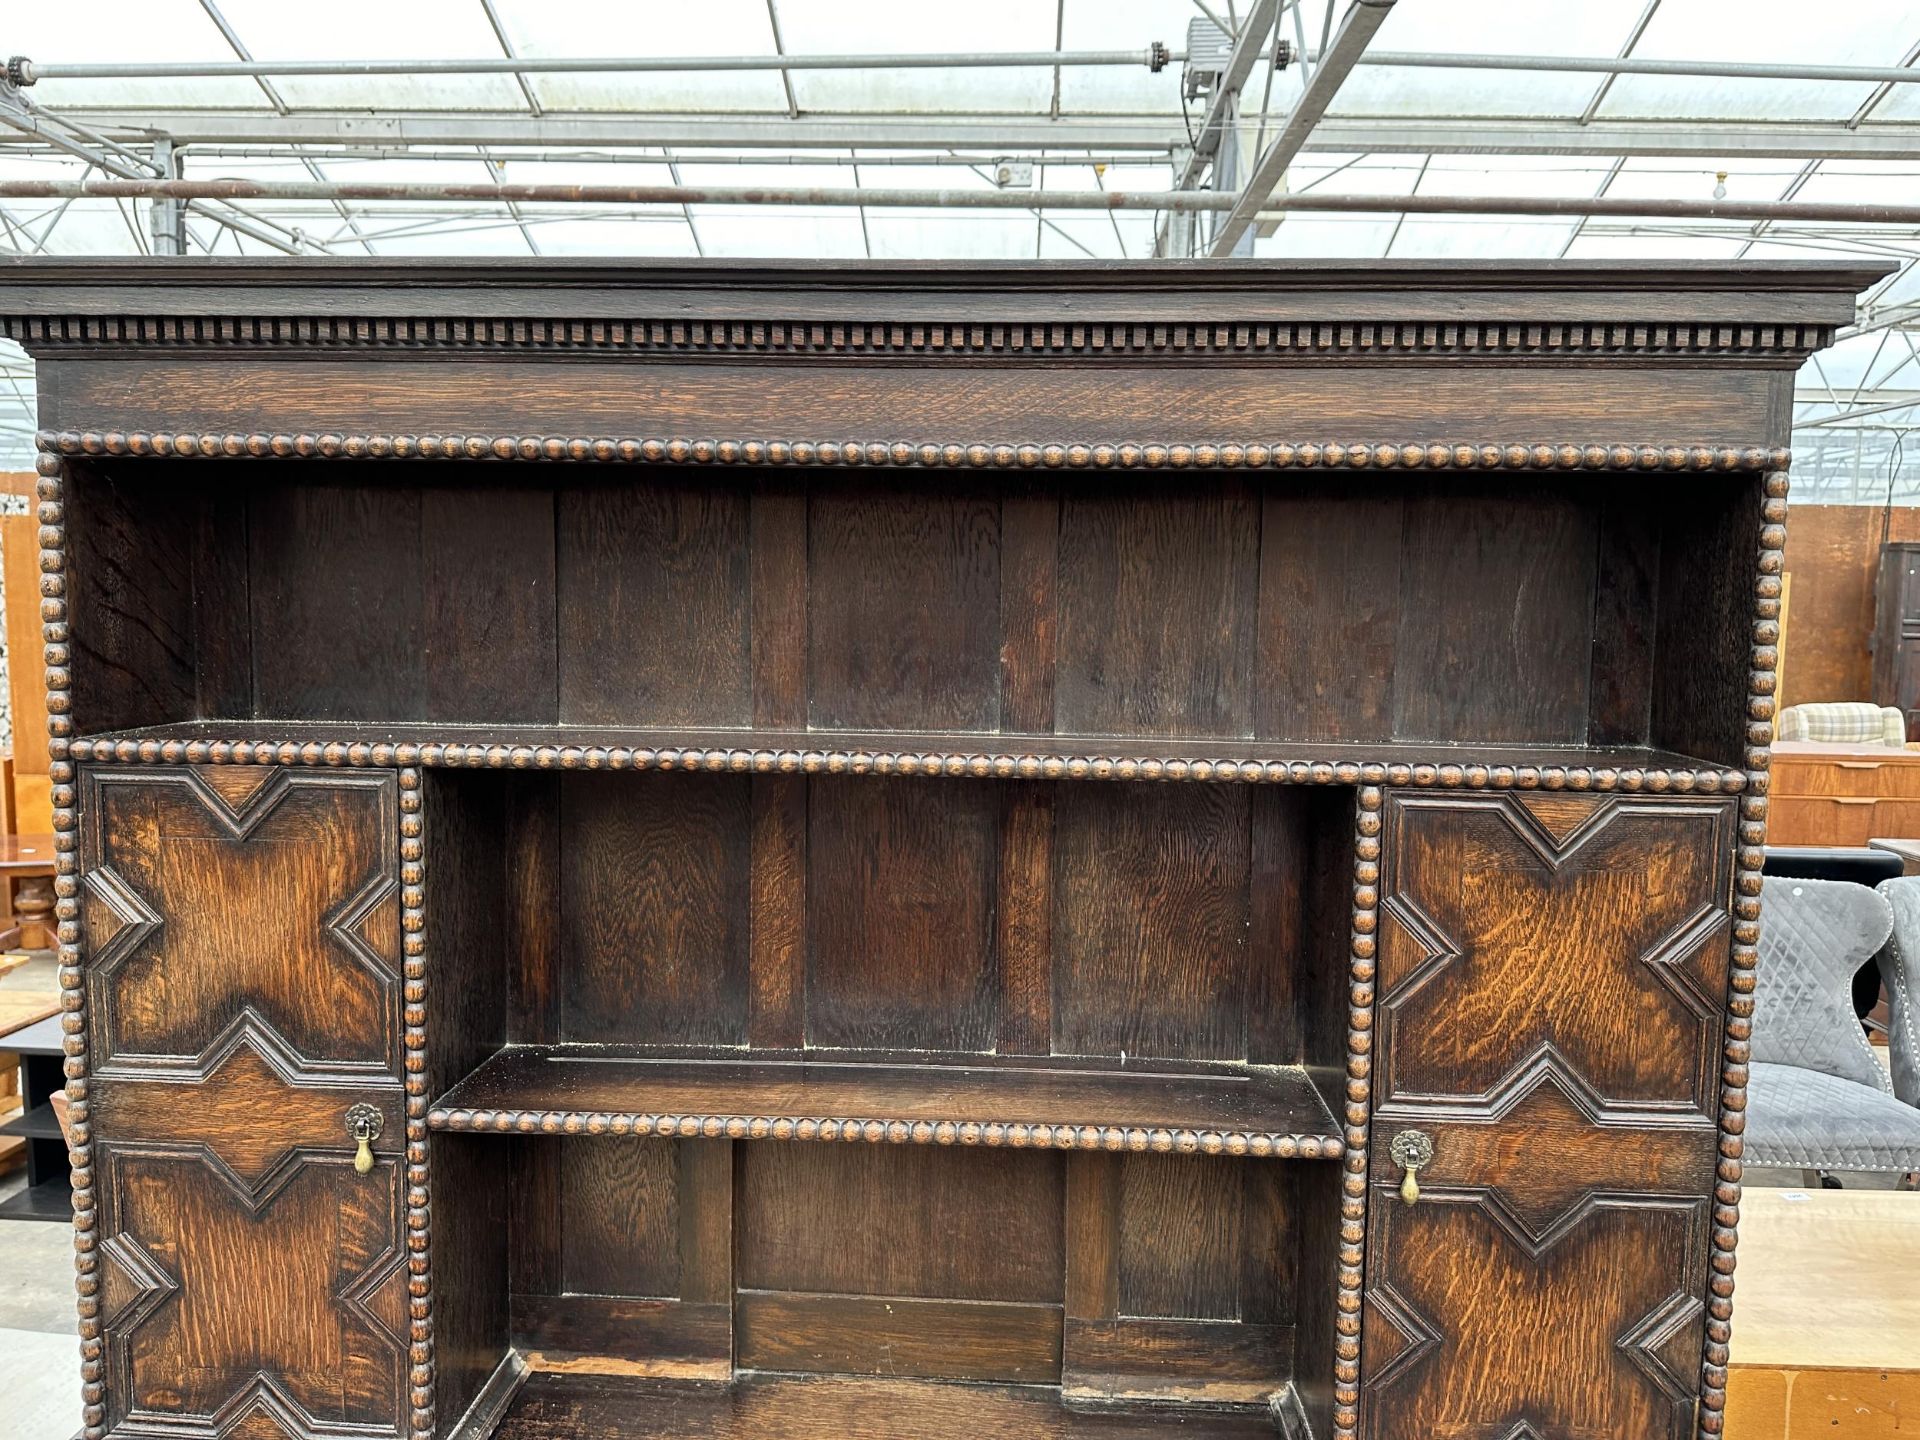 AN OAK JACOBEAN STYLE DRESSER WITH TWO FOLD-D0WN COMPARTMENTS AND A PLATE RACK ENCLOSING CUPBOARD - Image 2 of 7